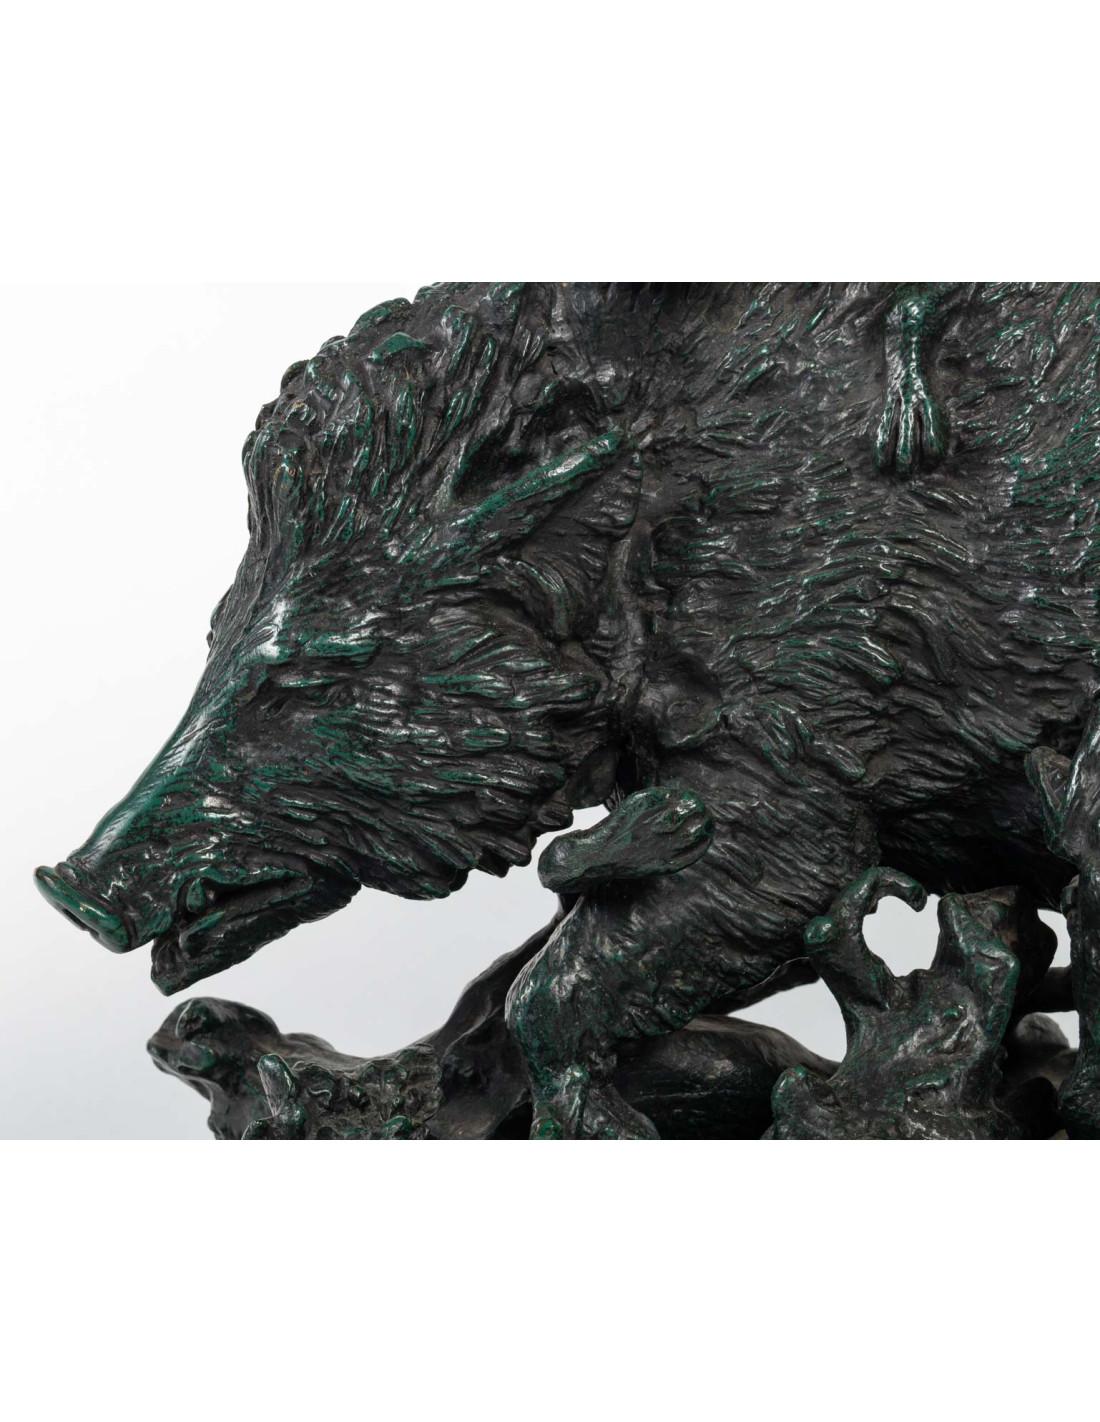 Patinated Bronze Sculpture , Hunting Dogs Assaulting the Wild Boar. For Sale